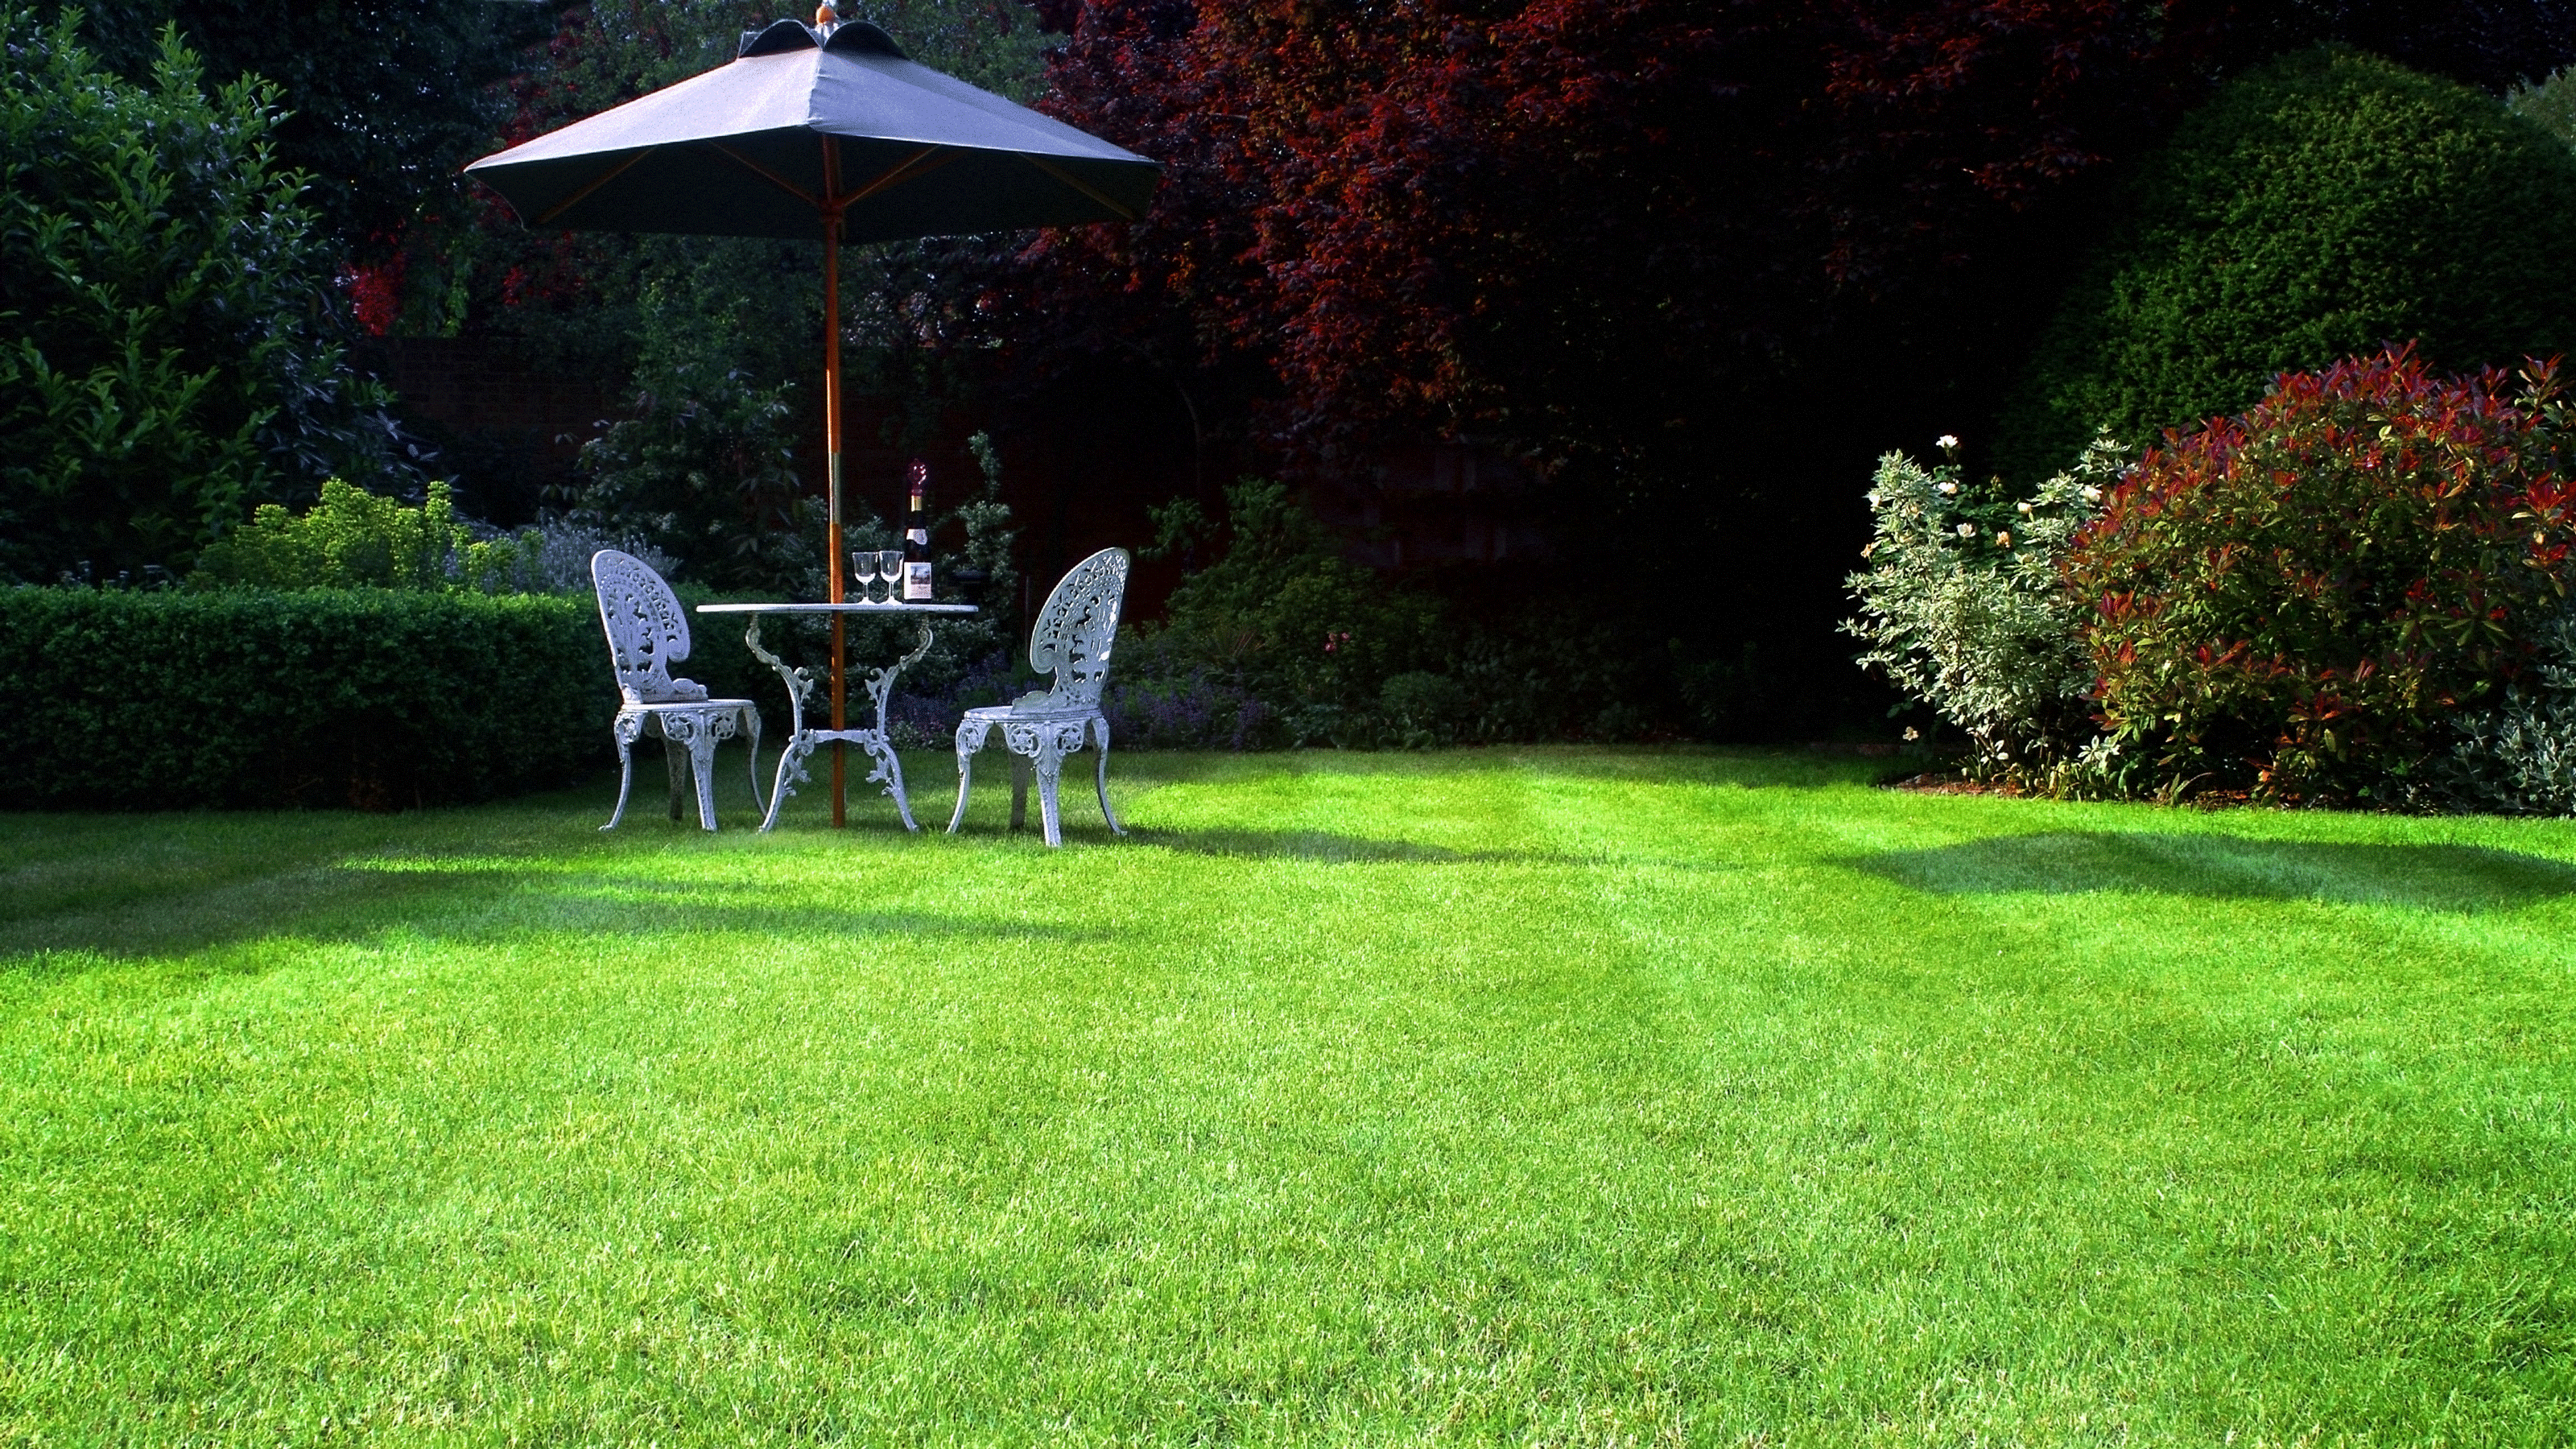 immaculate lawn with outdoor table and chairs and paraol